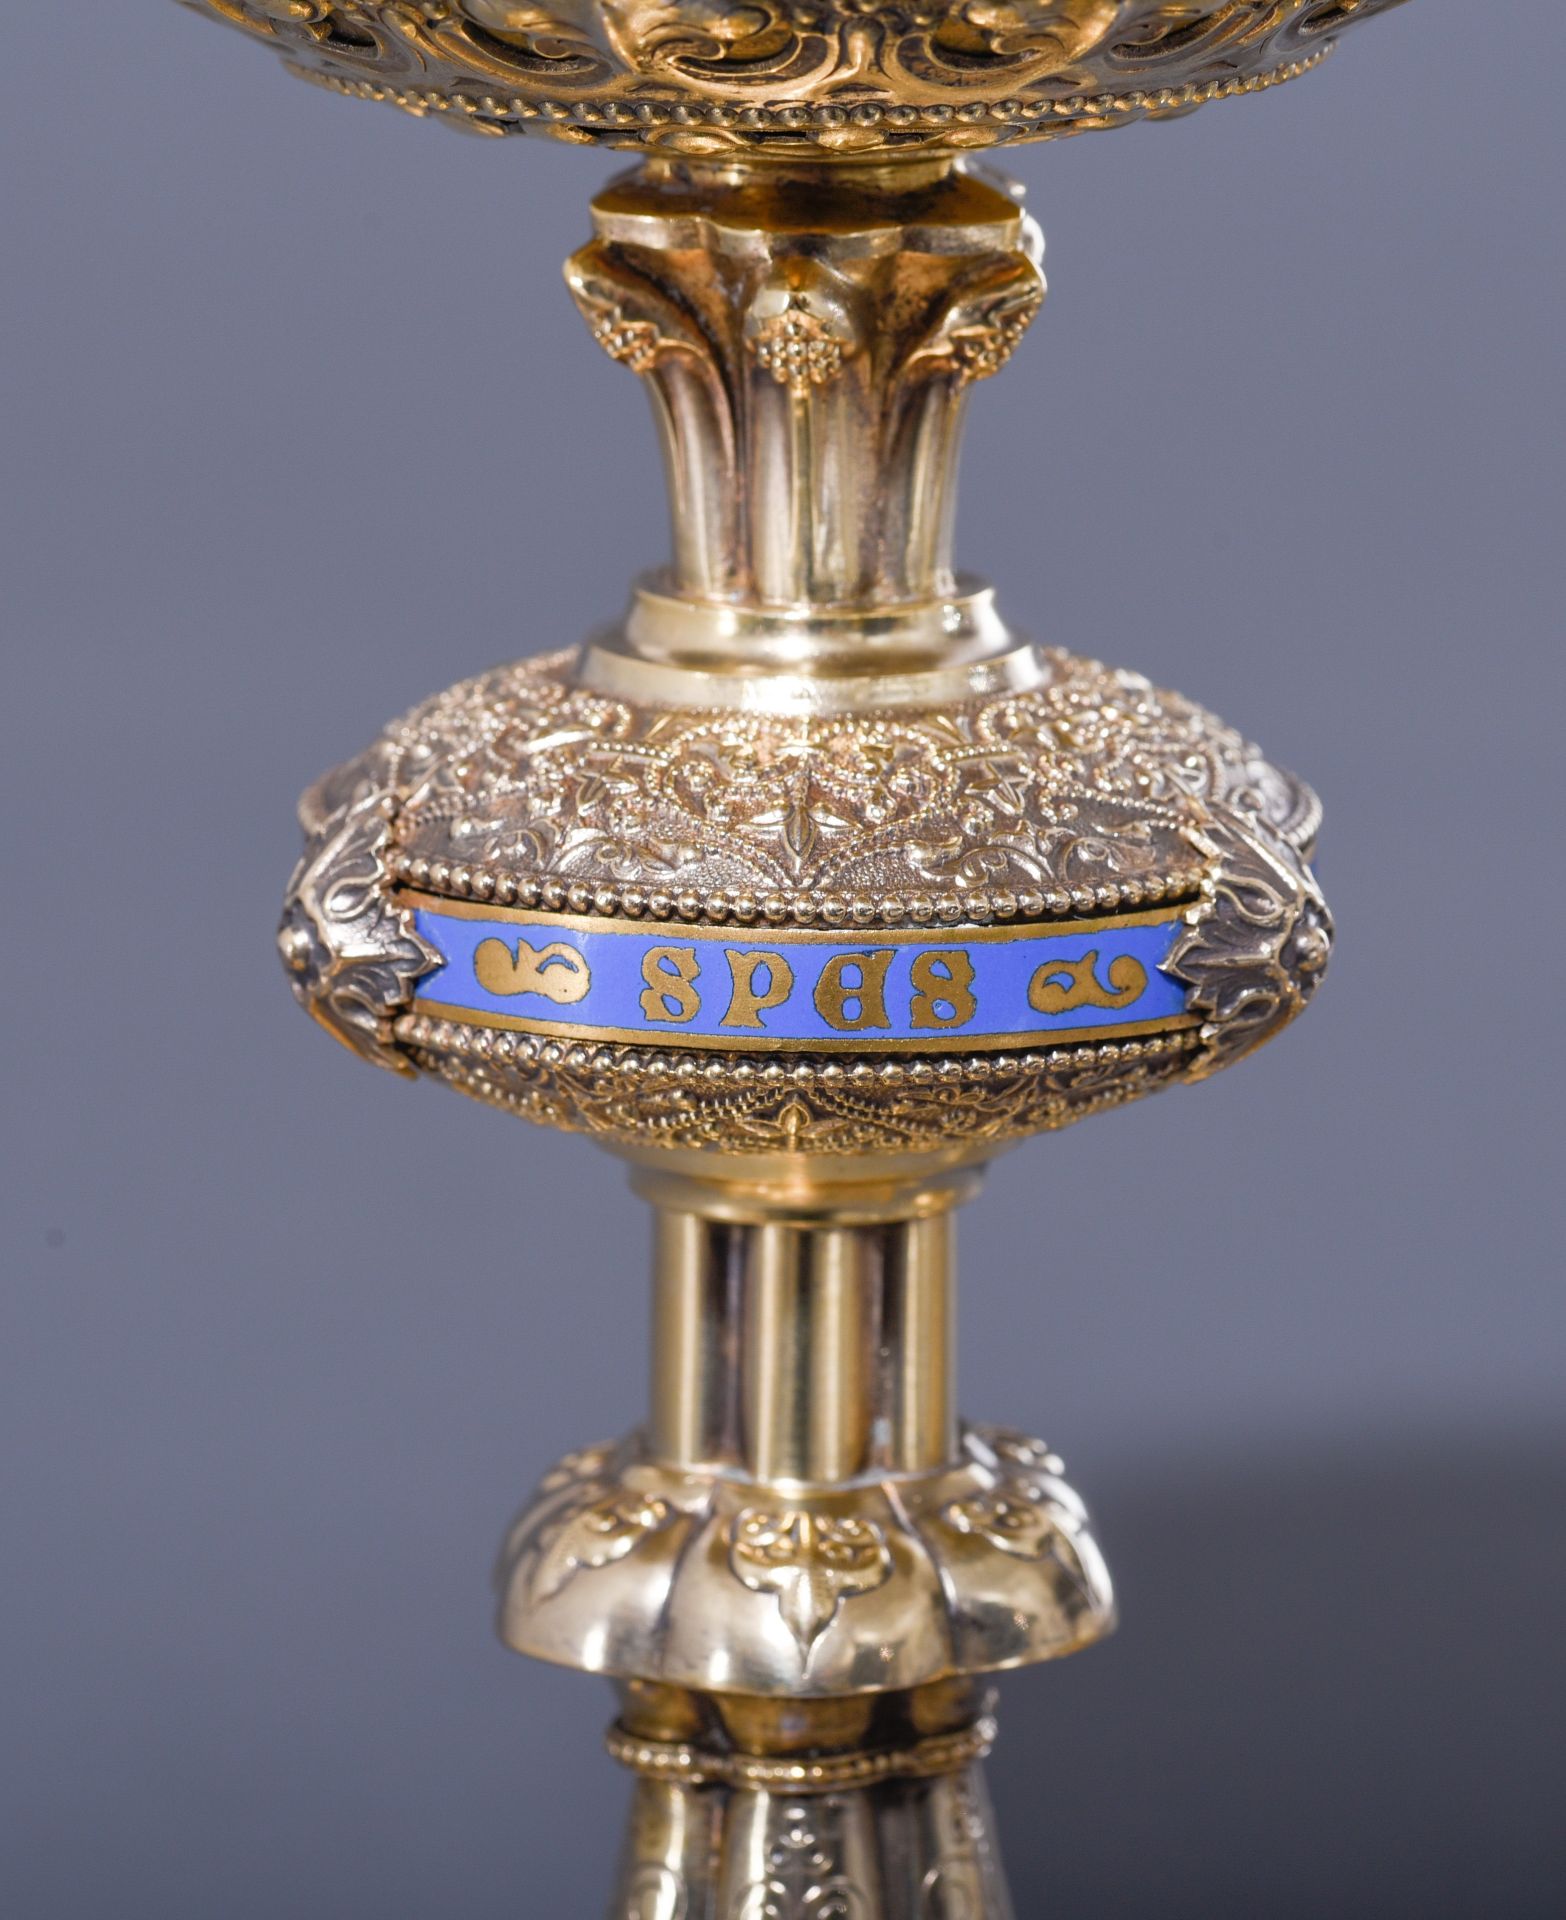 A French export silver and gilt silver chalice decorated with filigree work, H 31 cm - total weight - Image 10 of 24